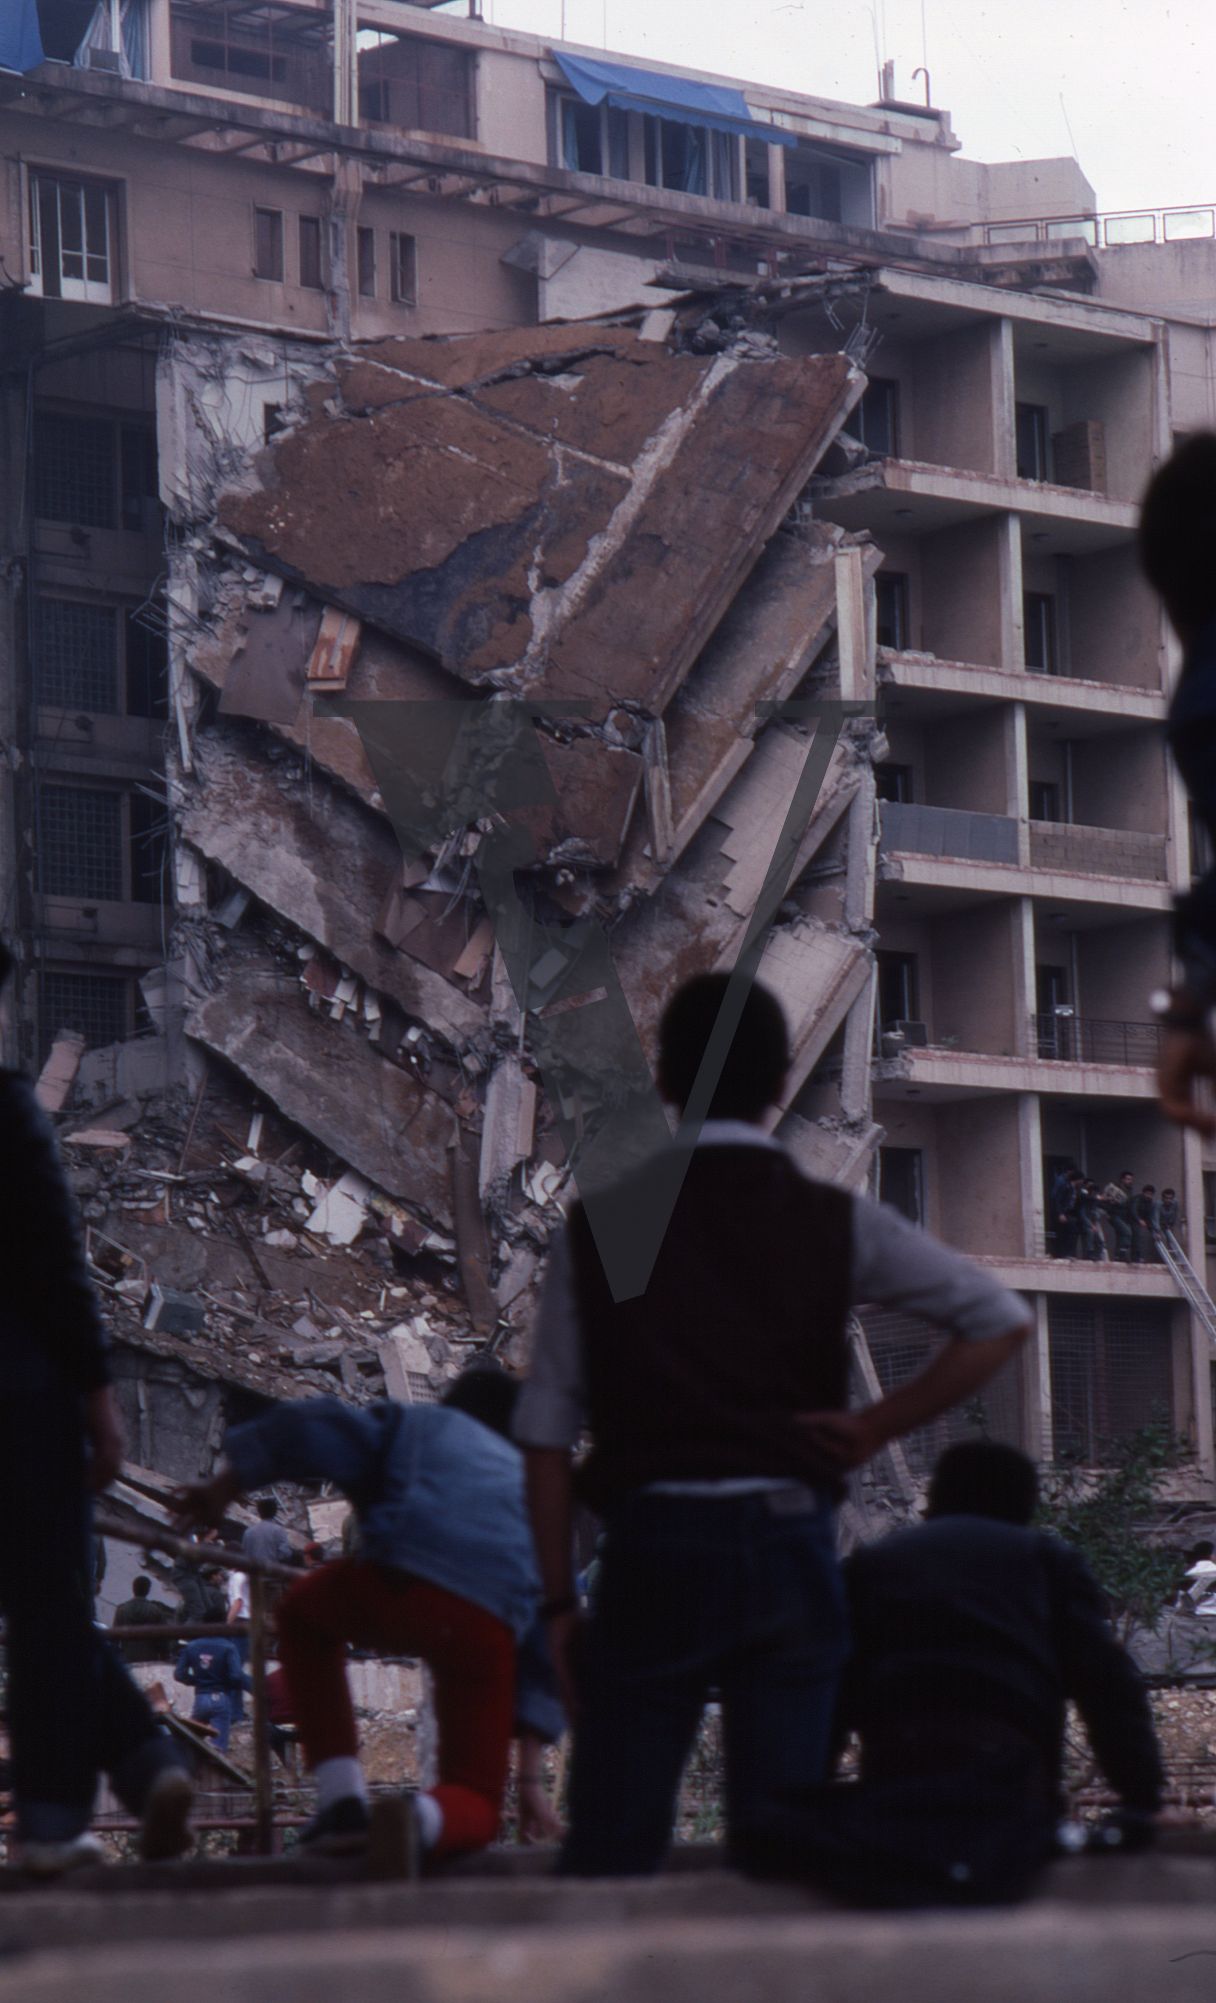 Lebanon, US Embassy Bombing, April 18, Beirut, collapsed embassy side-view, man watches on.